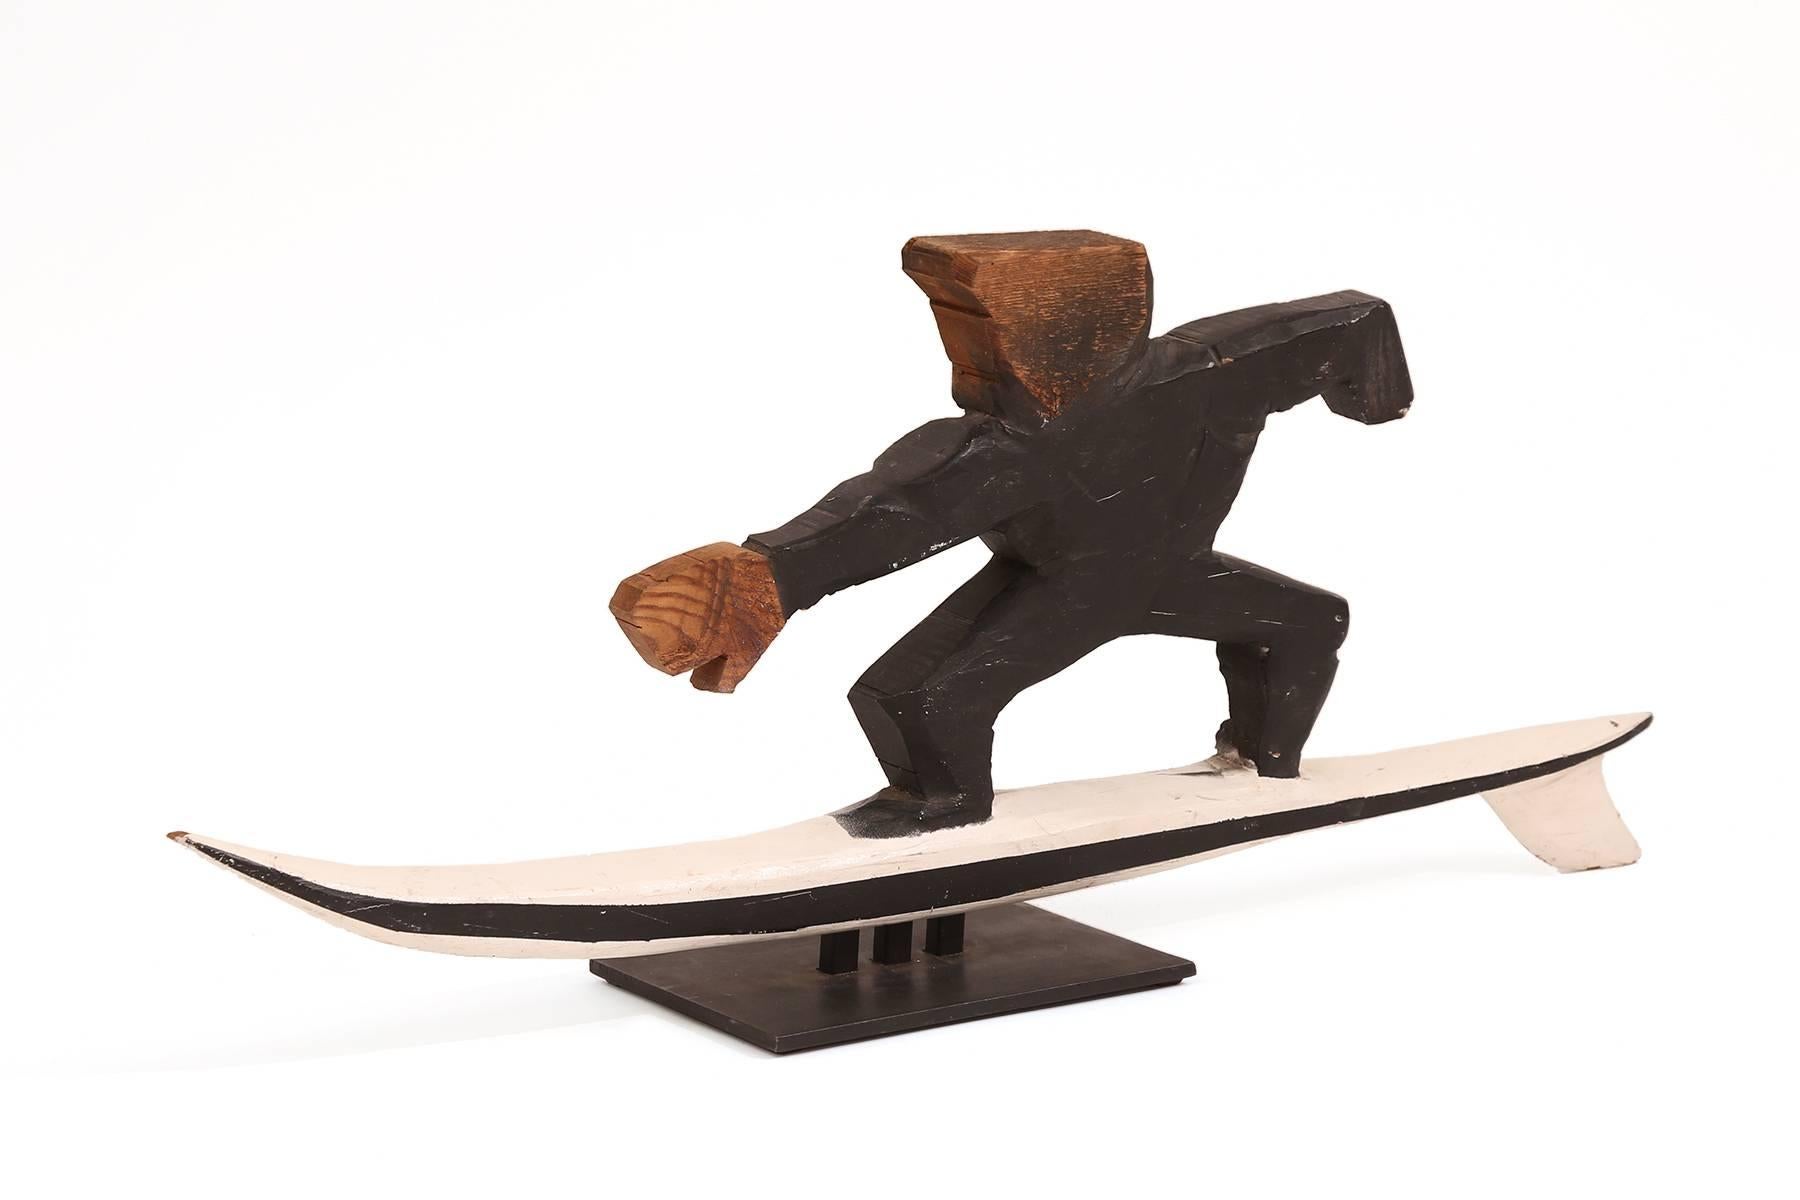 Folk Art surfer sculpture, circa early 1950s. This unsigned example has wonderful movement and patina and is a perfect gift for your favorite surfer friend.